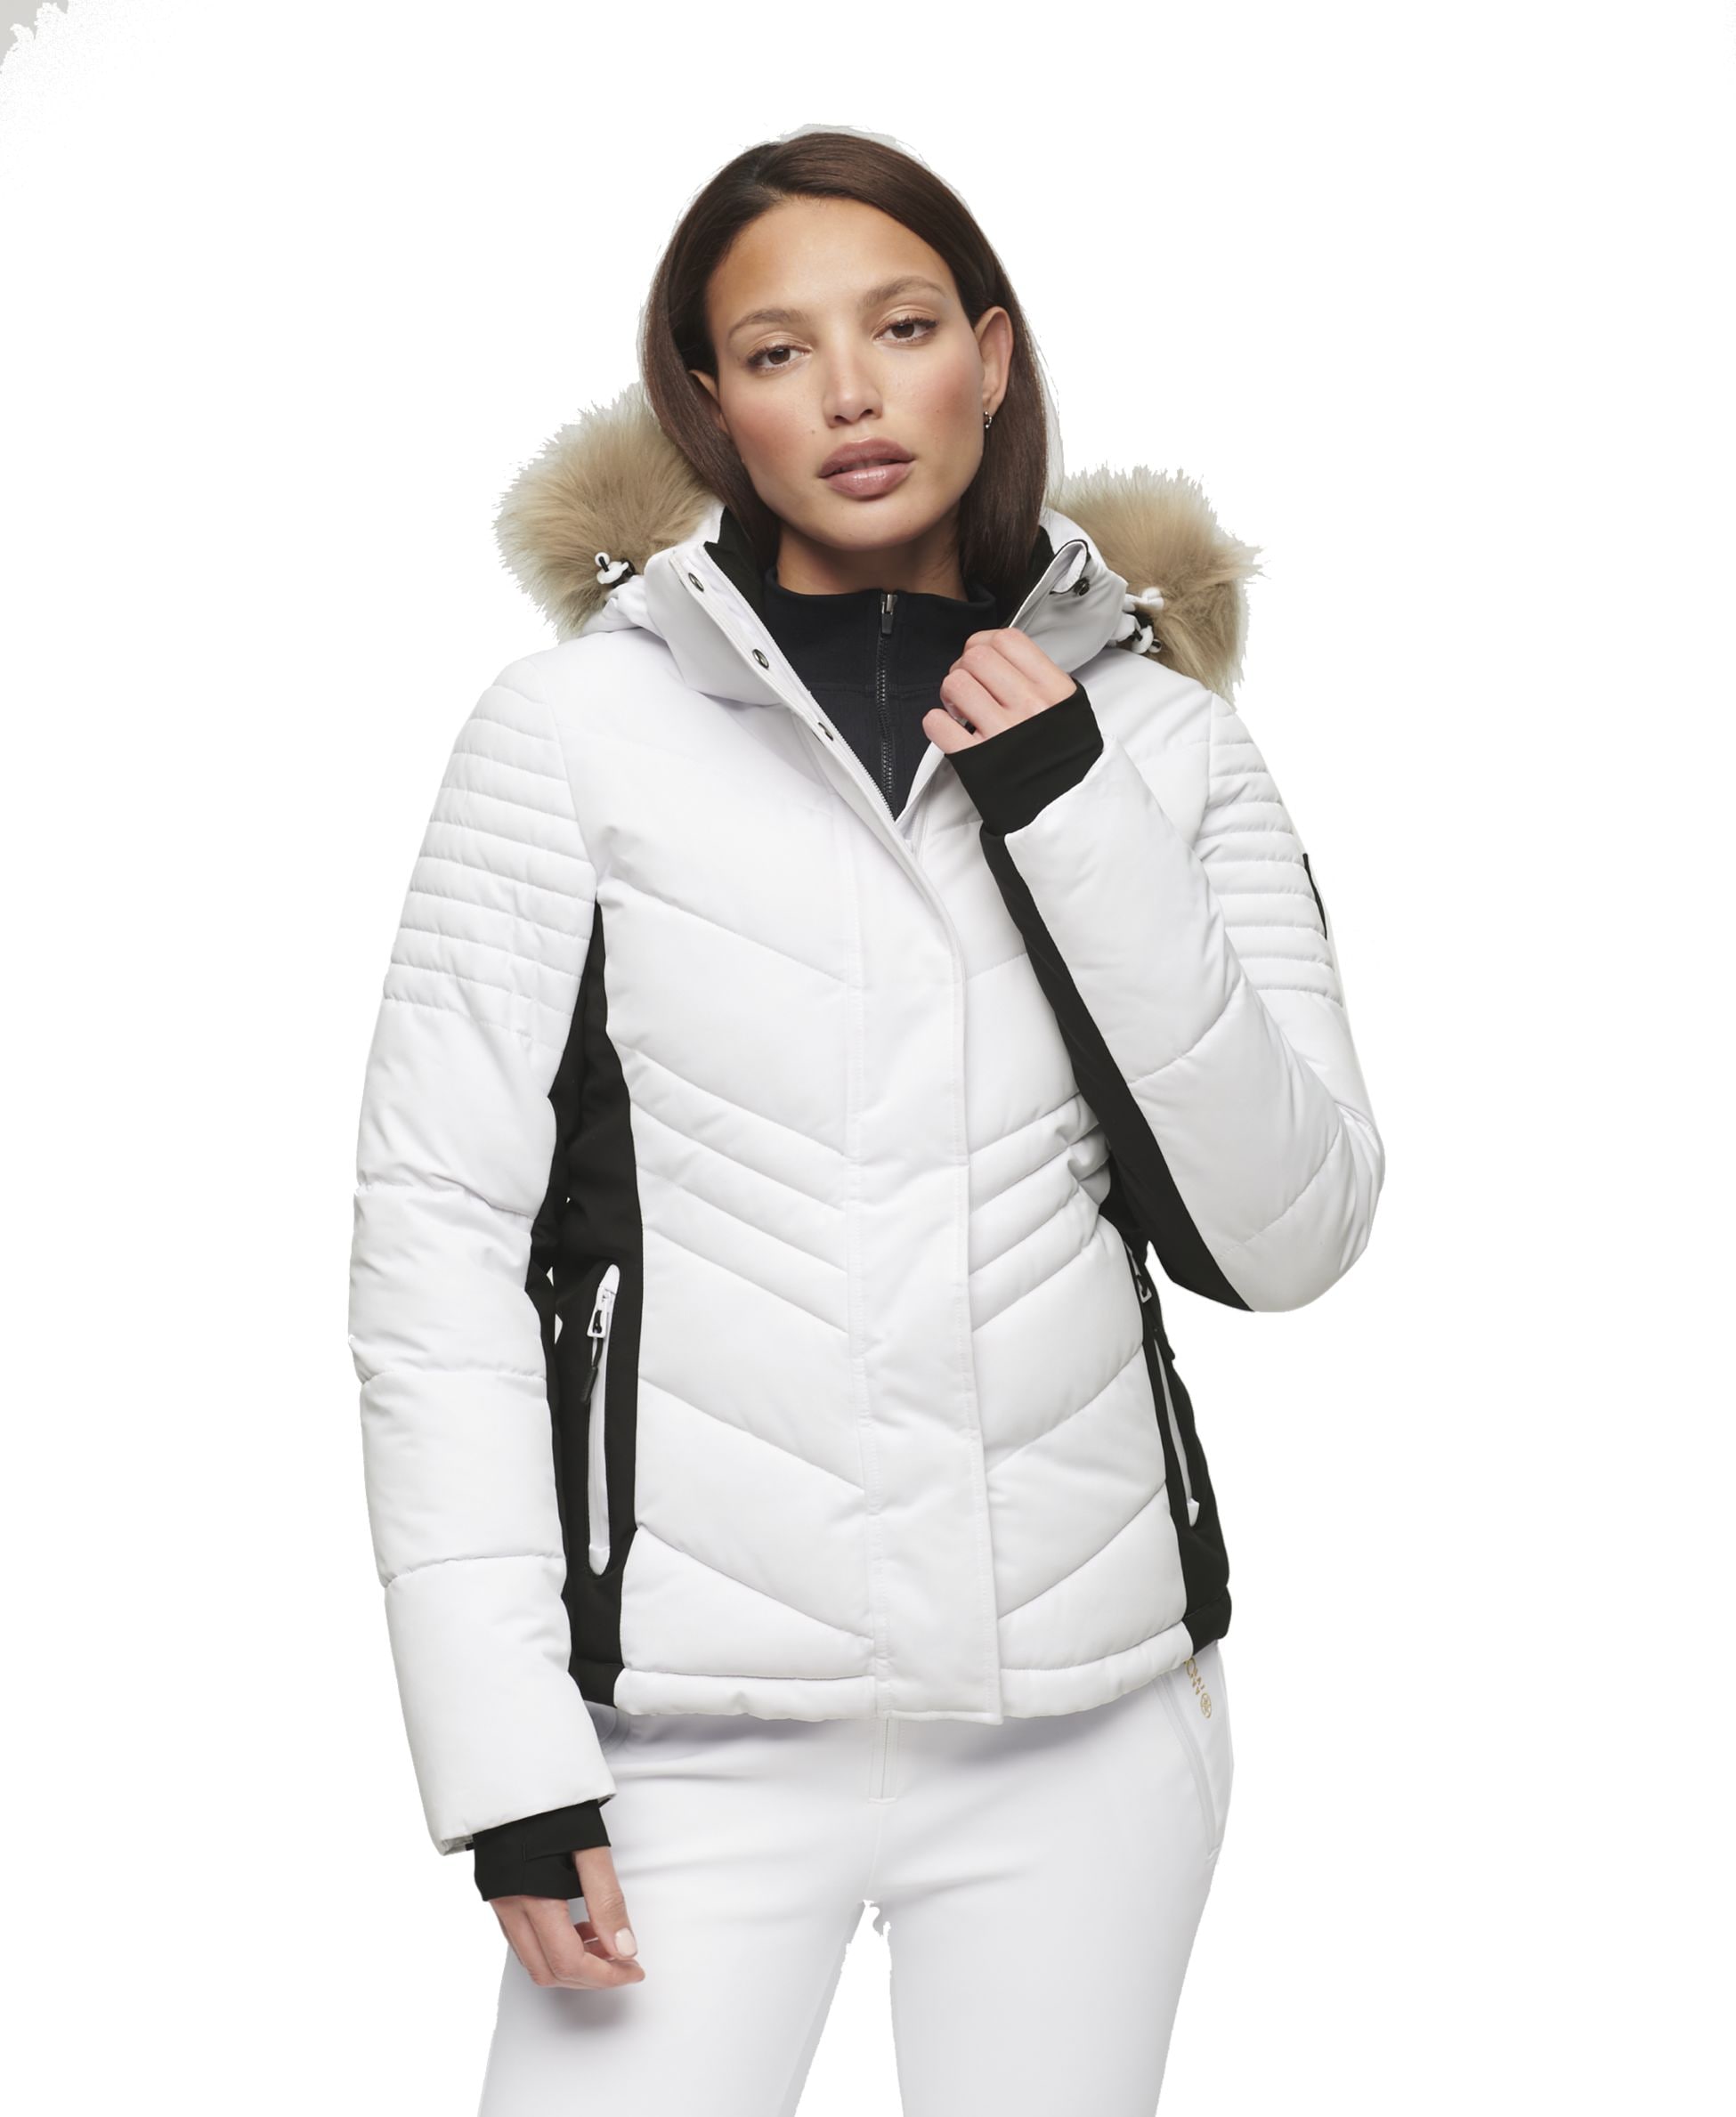 SUPERDRY, SKI LUXE PUFFER JACKET